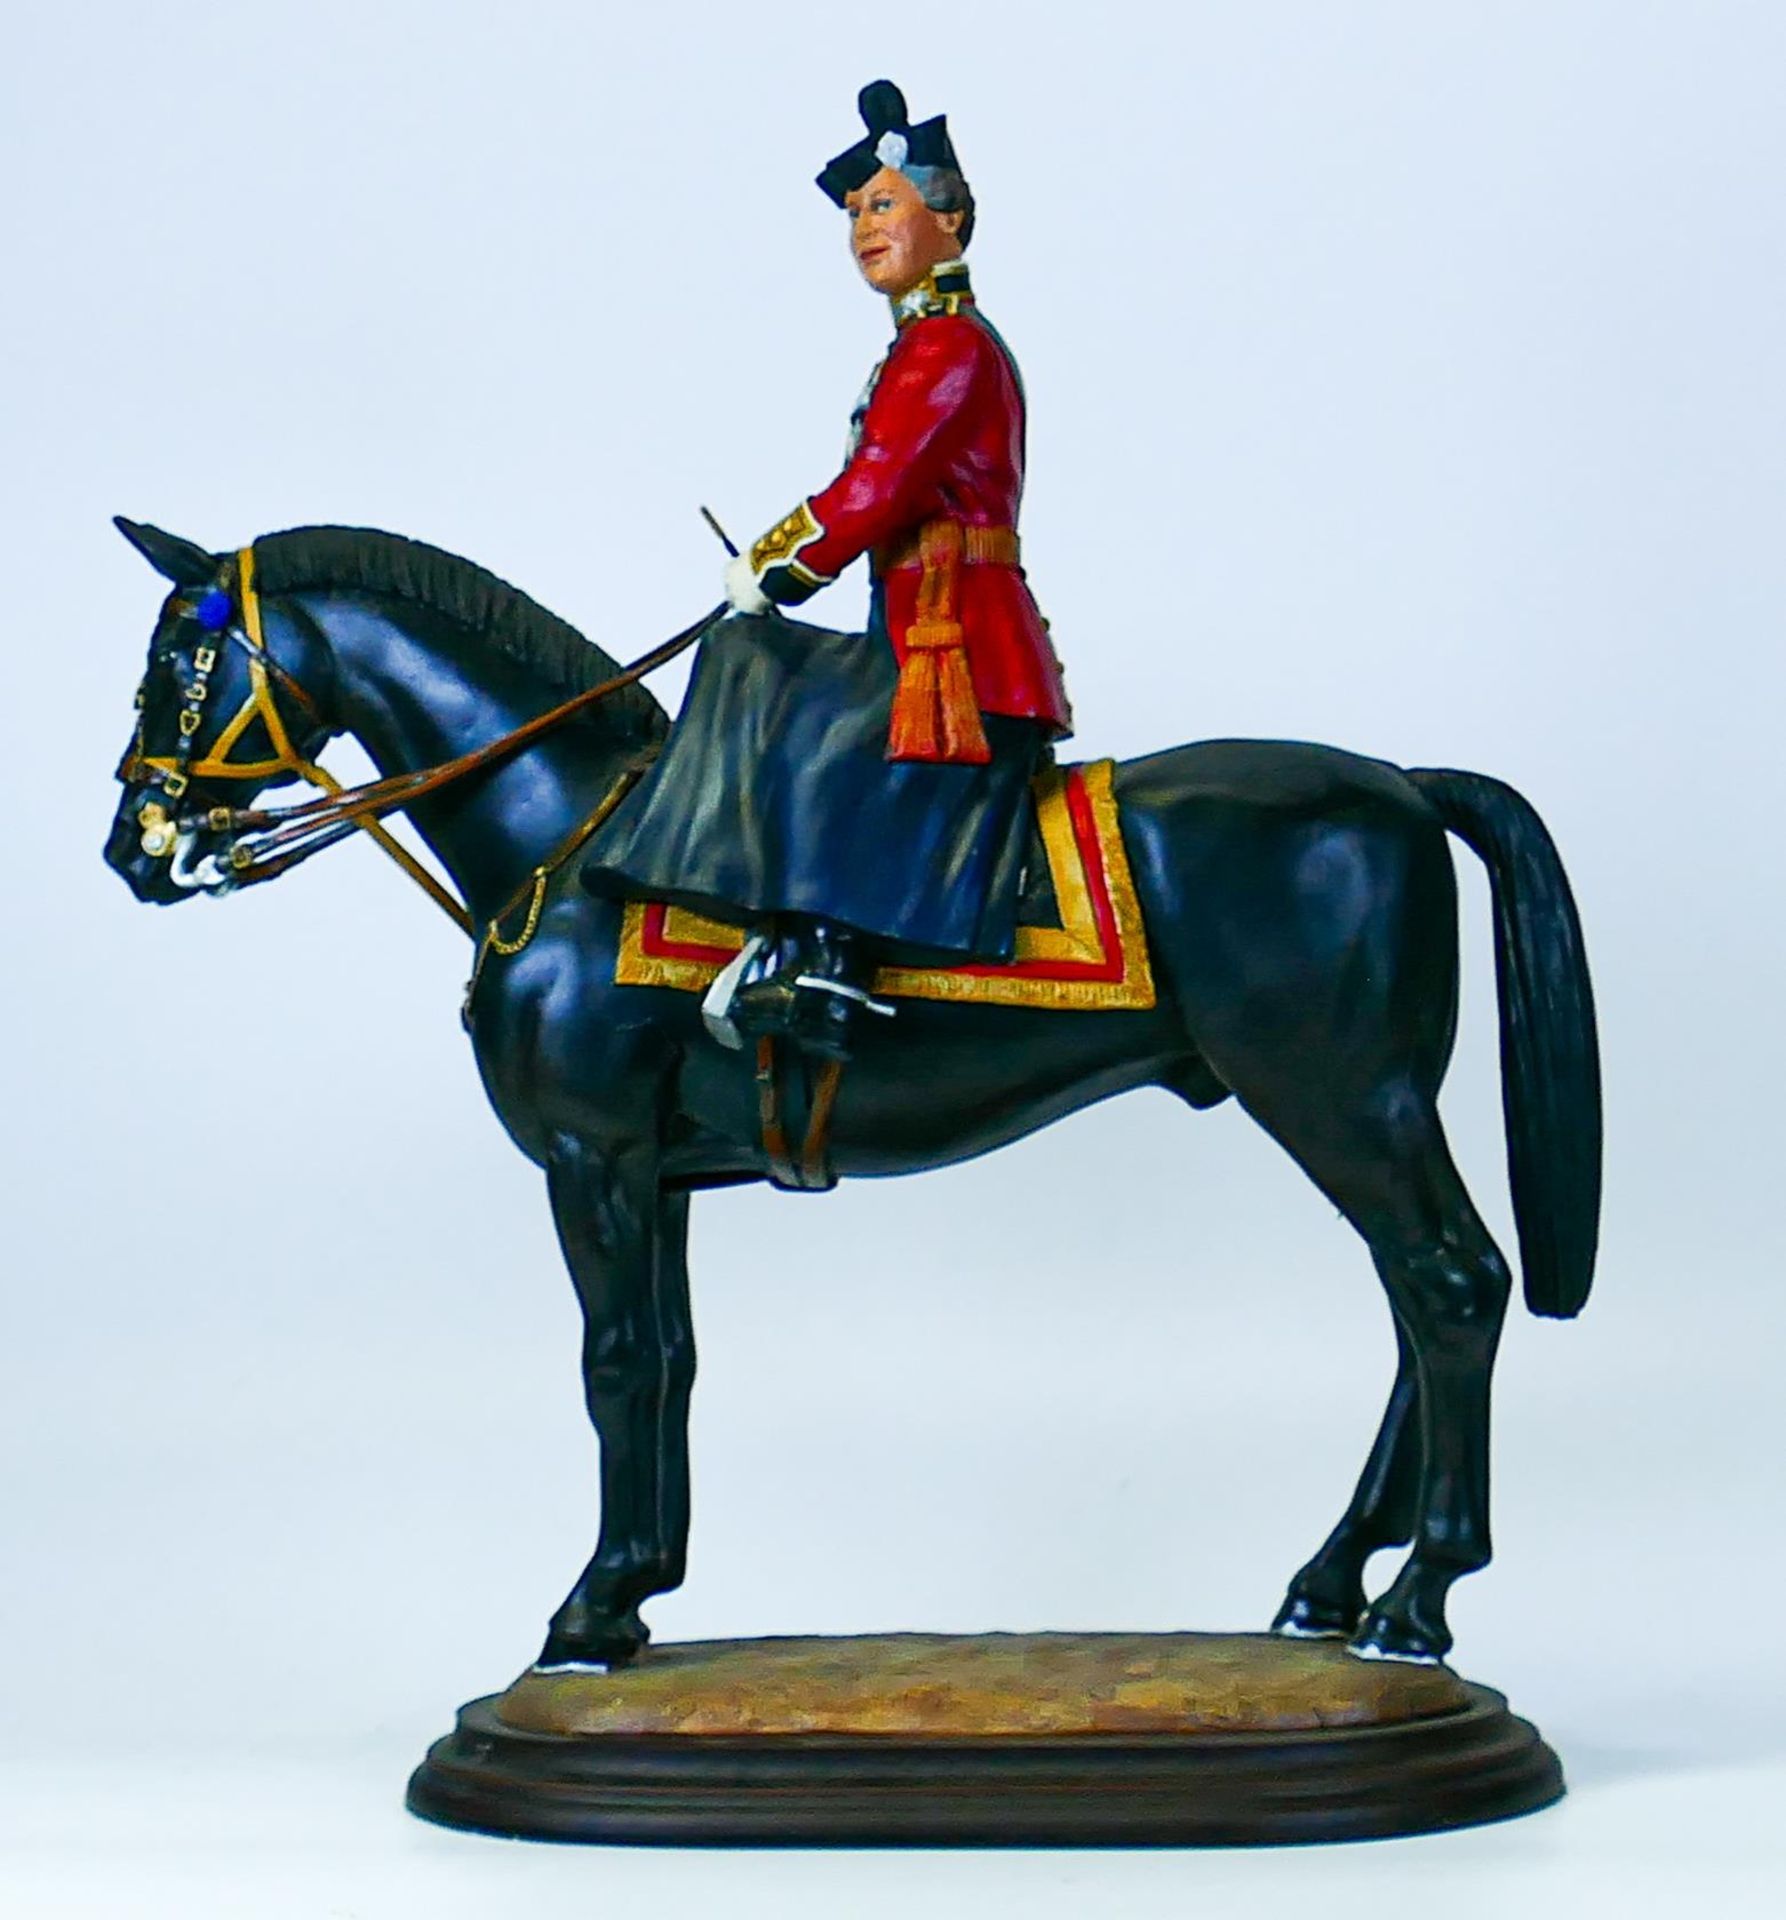 Ressin Figure of Her Majesty Queen Elizabeth II, Colonel-in-Chief of The Household Division